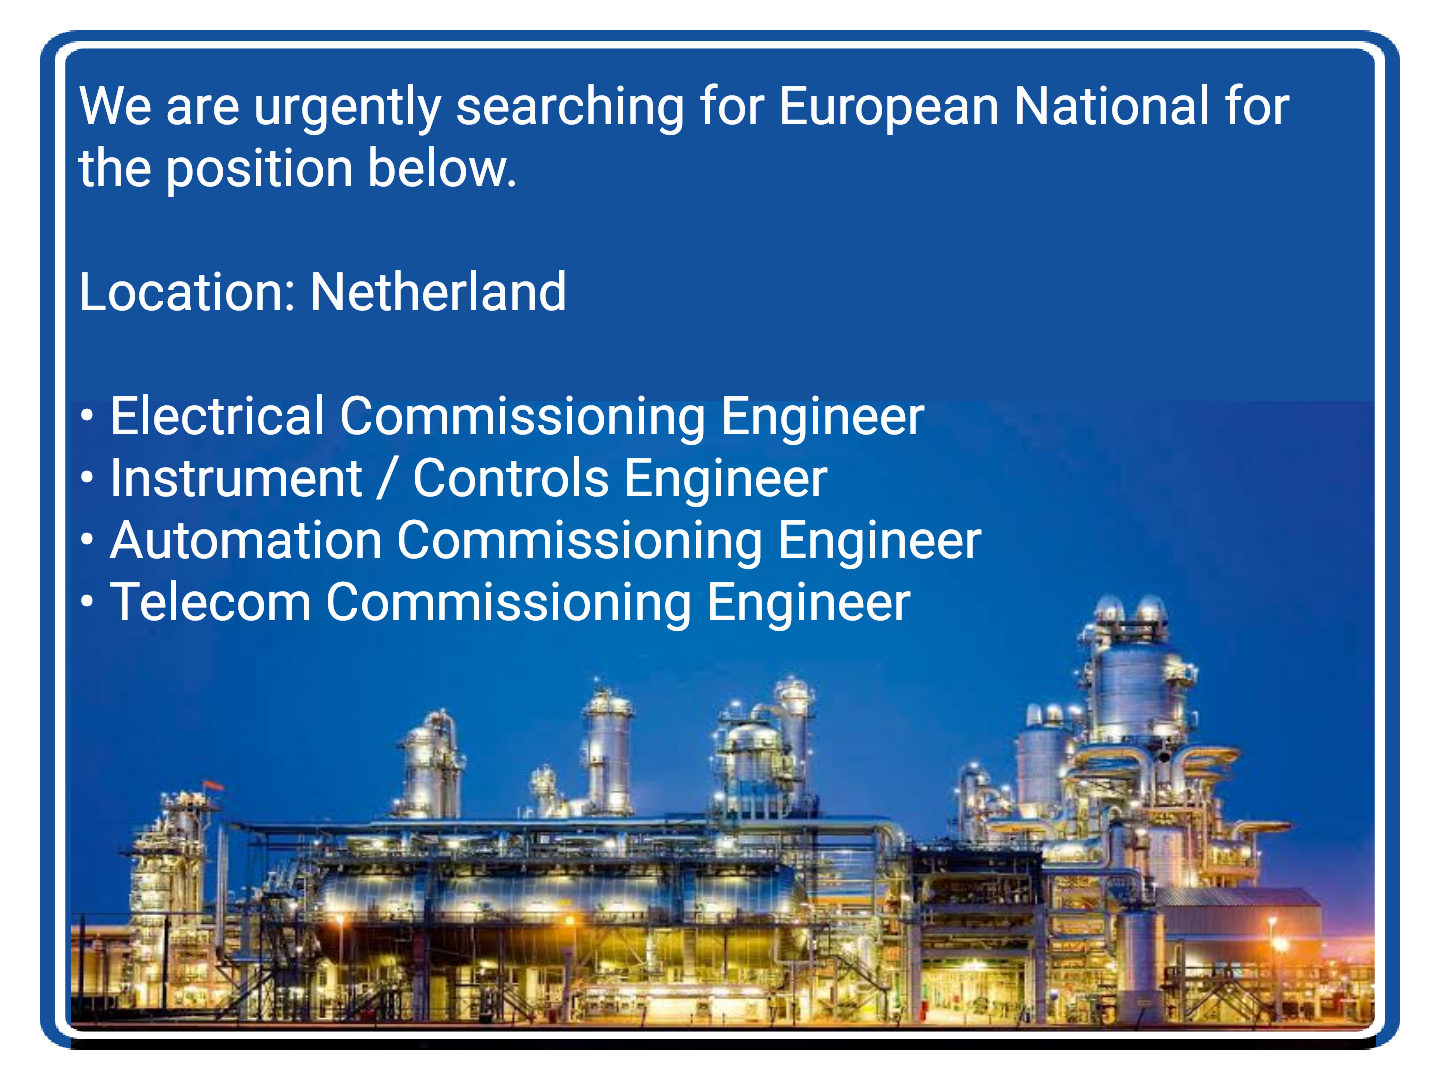 Electrical, Instrument, Automation & Telecom Commissioning Jobs